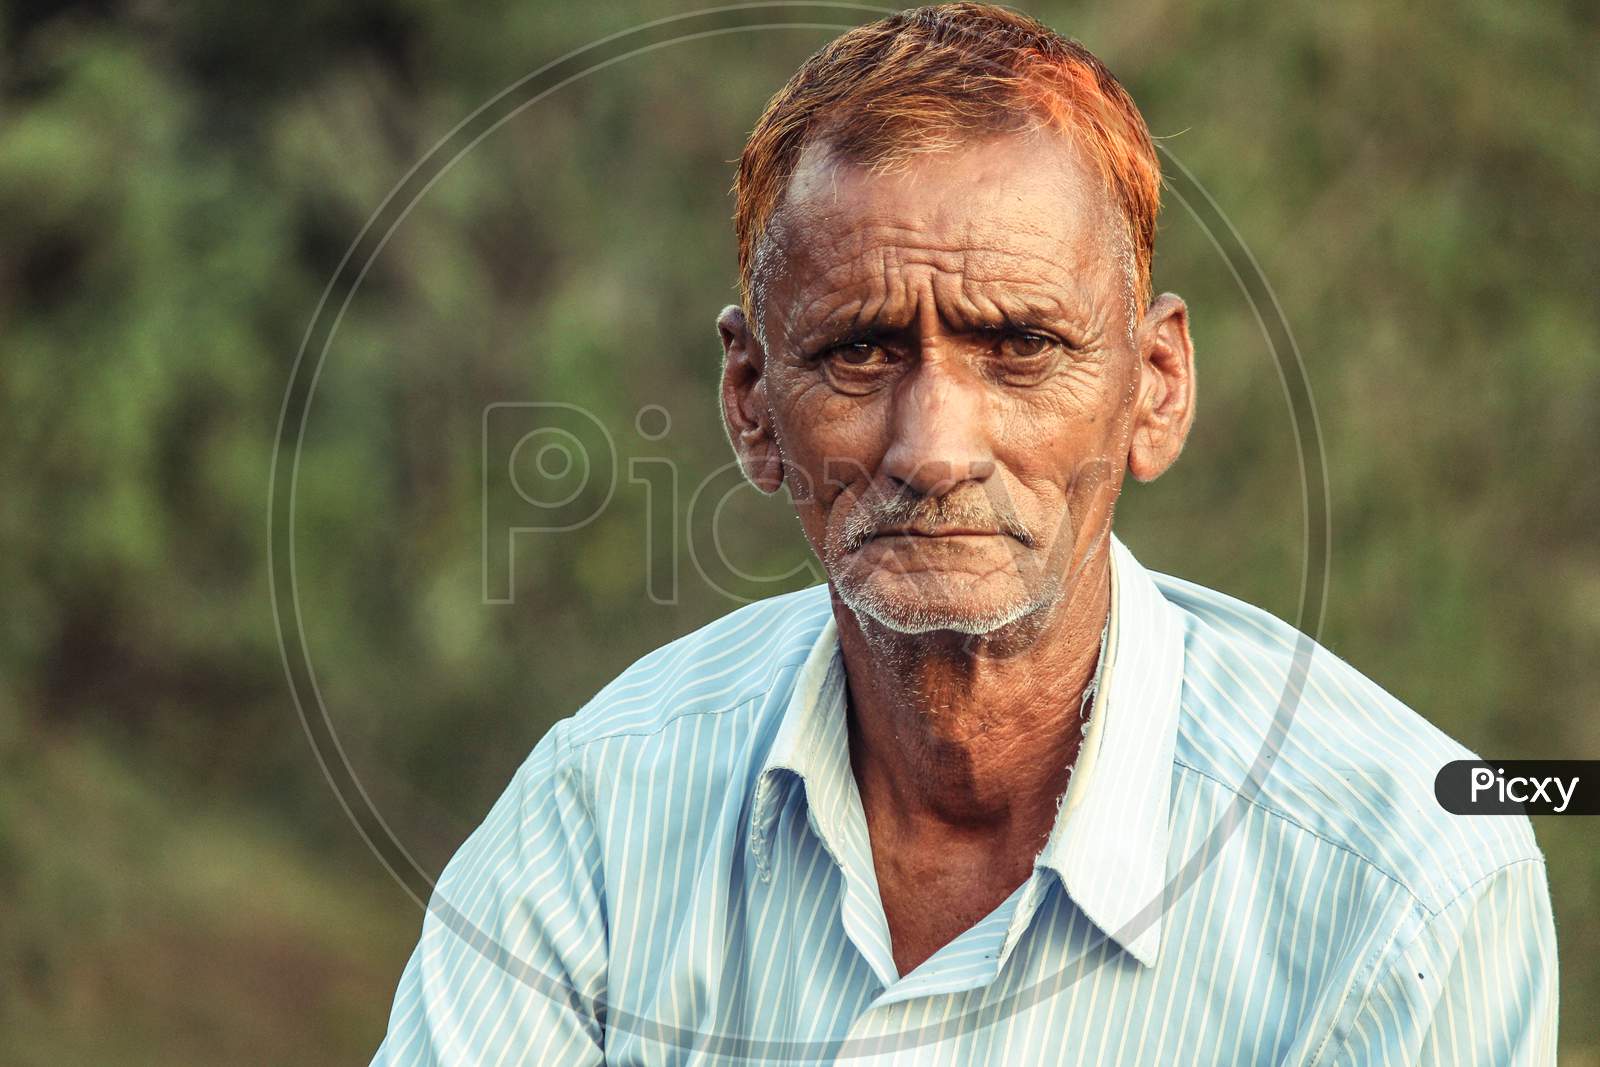 Almora, Uttrakhand, India- May 22 2020: A Travel Portrait Of An Old Person Looking Into The Camera, Wrinkles All Over The Face And Red Hair.